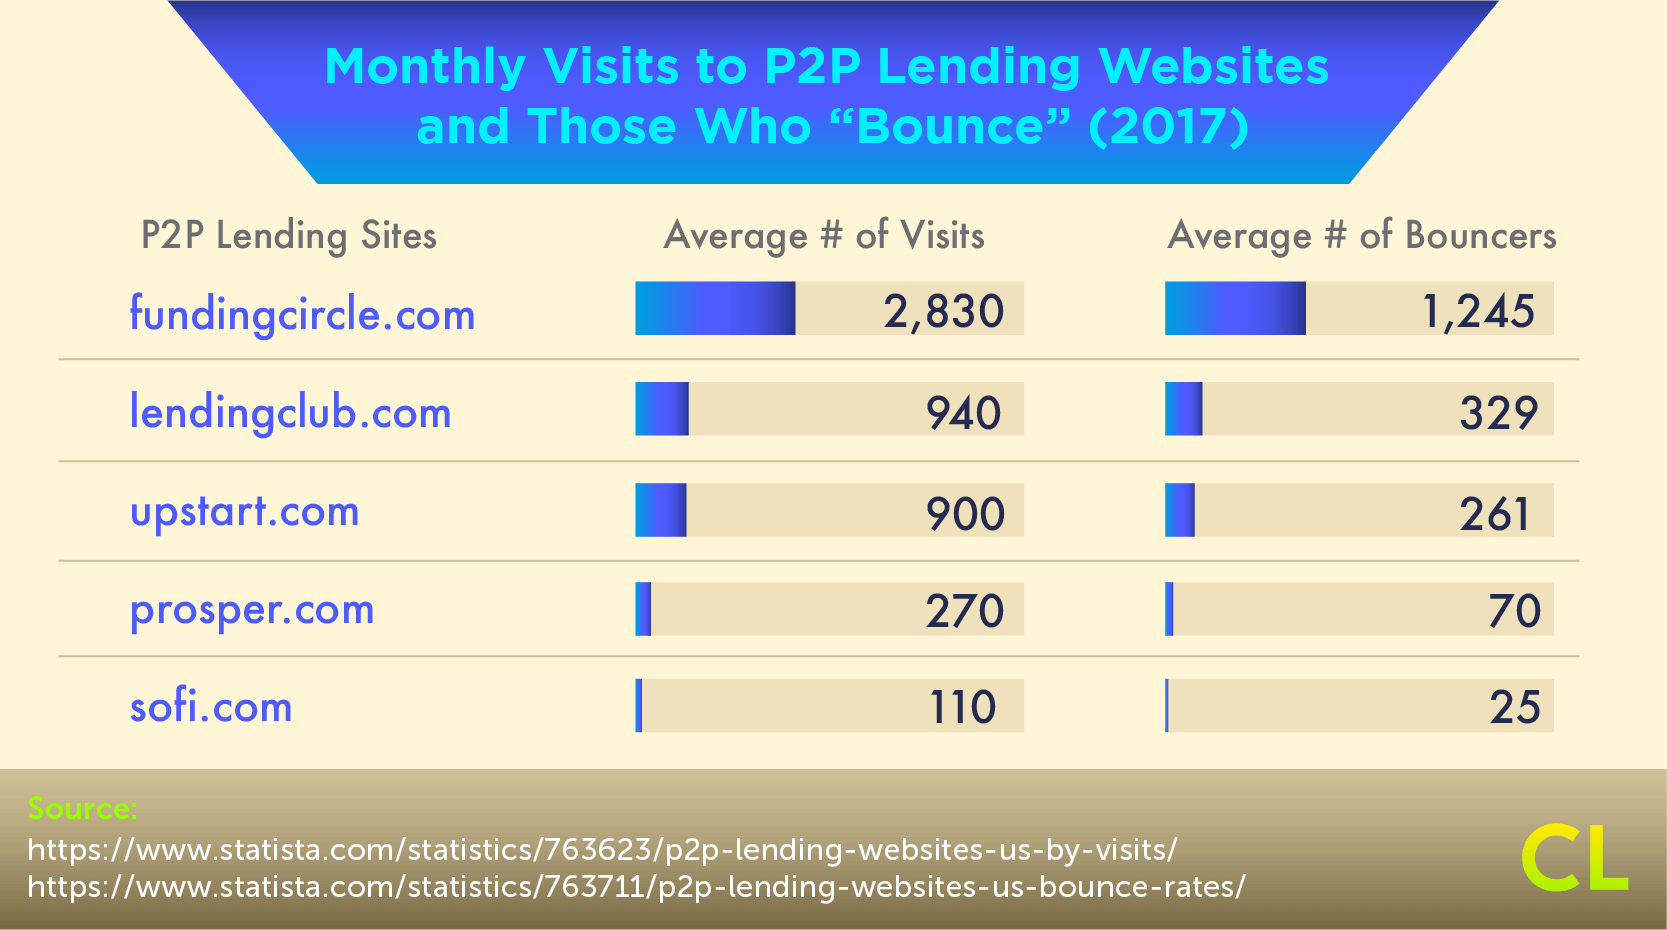 Monthly Visits to P2P Lending Websites and Those Who Bounce